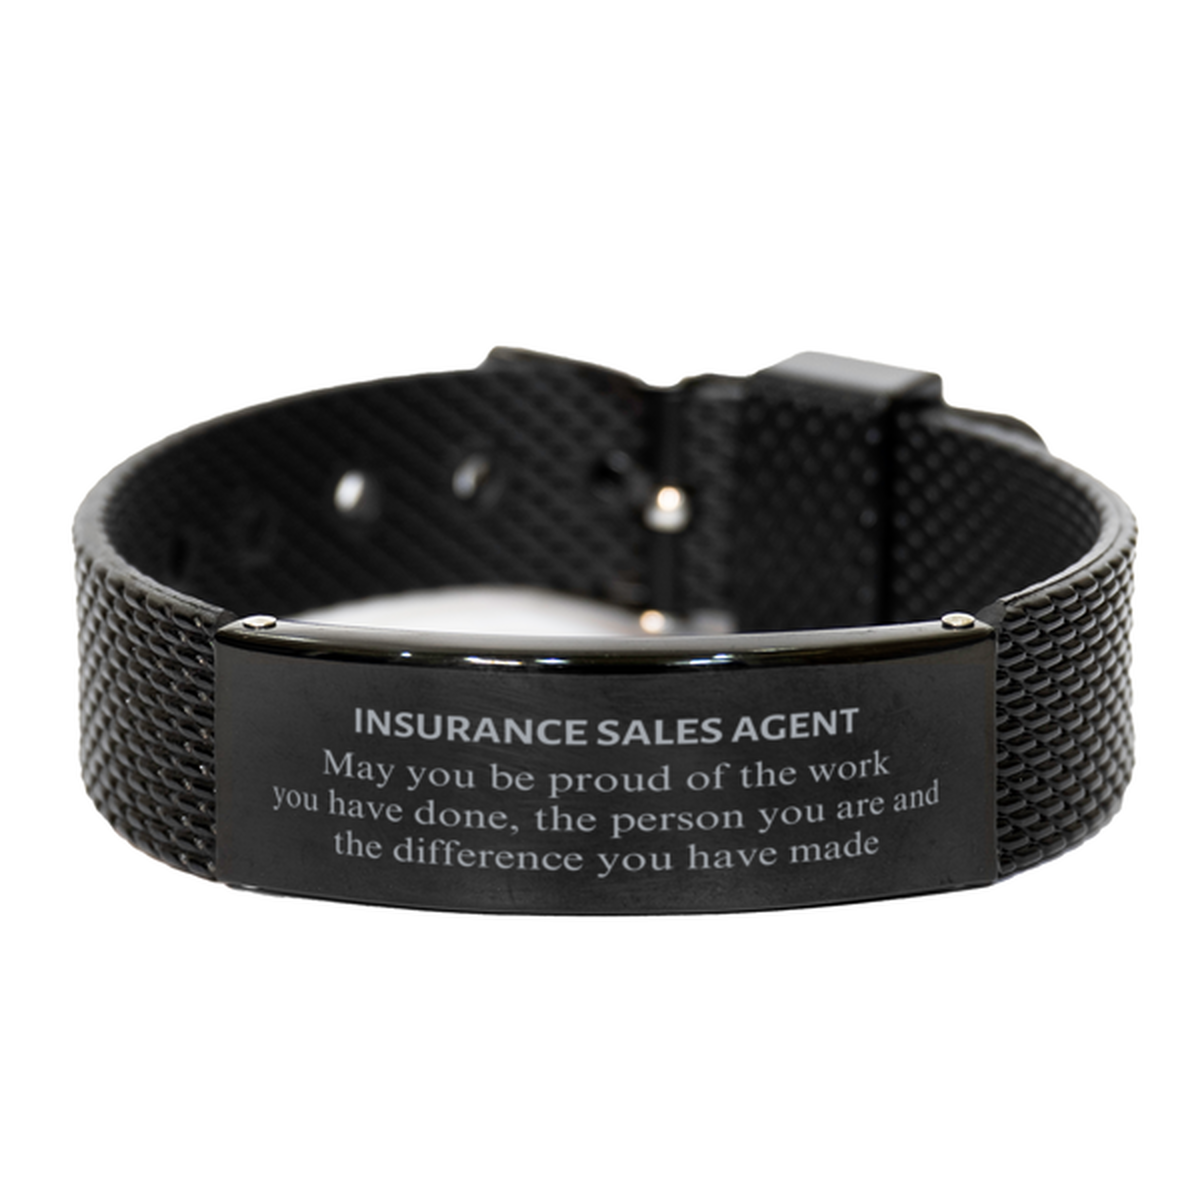 Insurance Sales Agent May you be proud of the work you have done, Retirement Insurance Sales Agent Black Shark Mesh Bracelet for Colleague Appreciation Gifts Amazing for Insurance Sales Agent